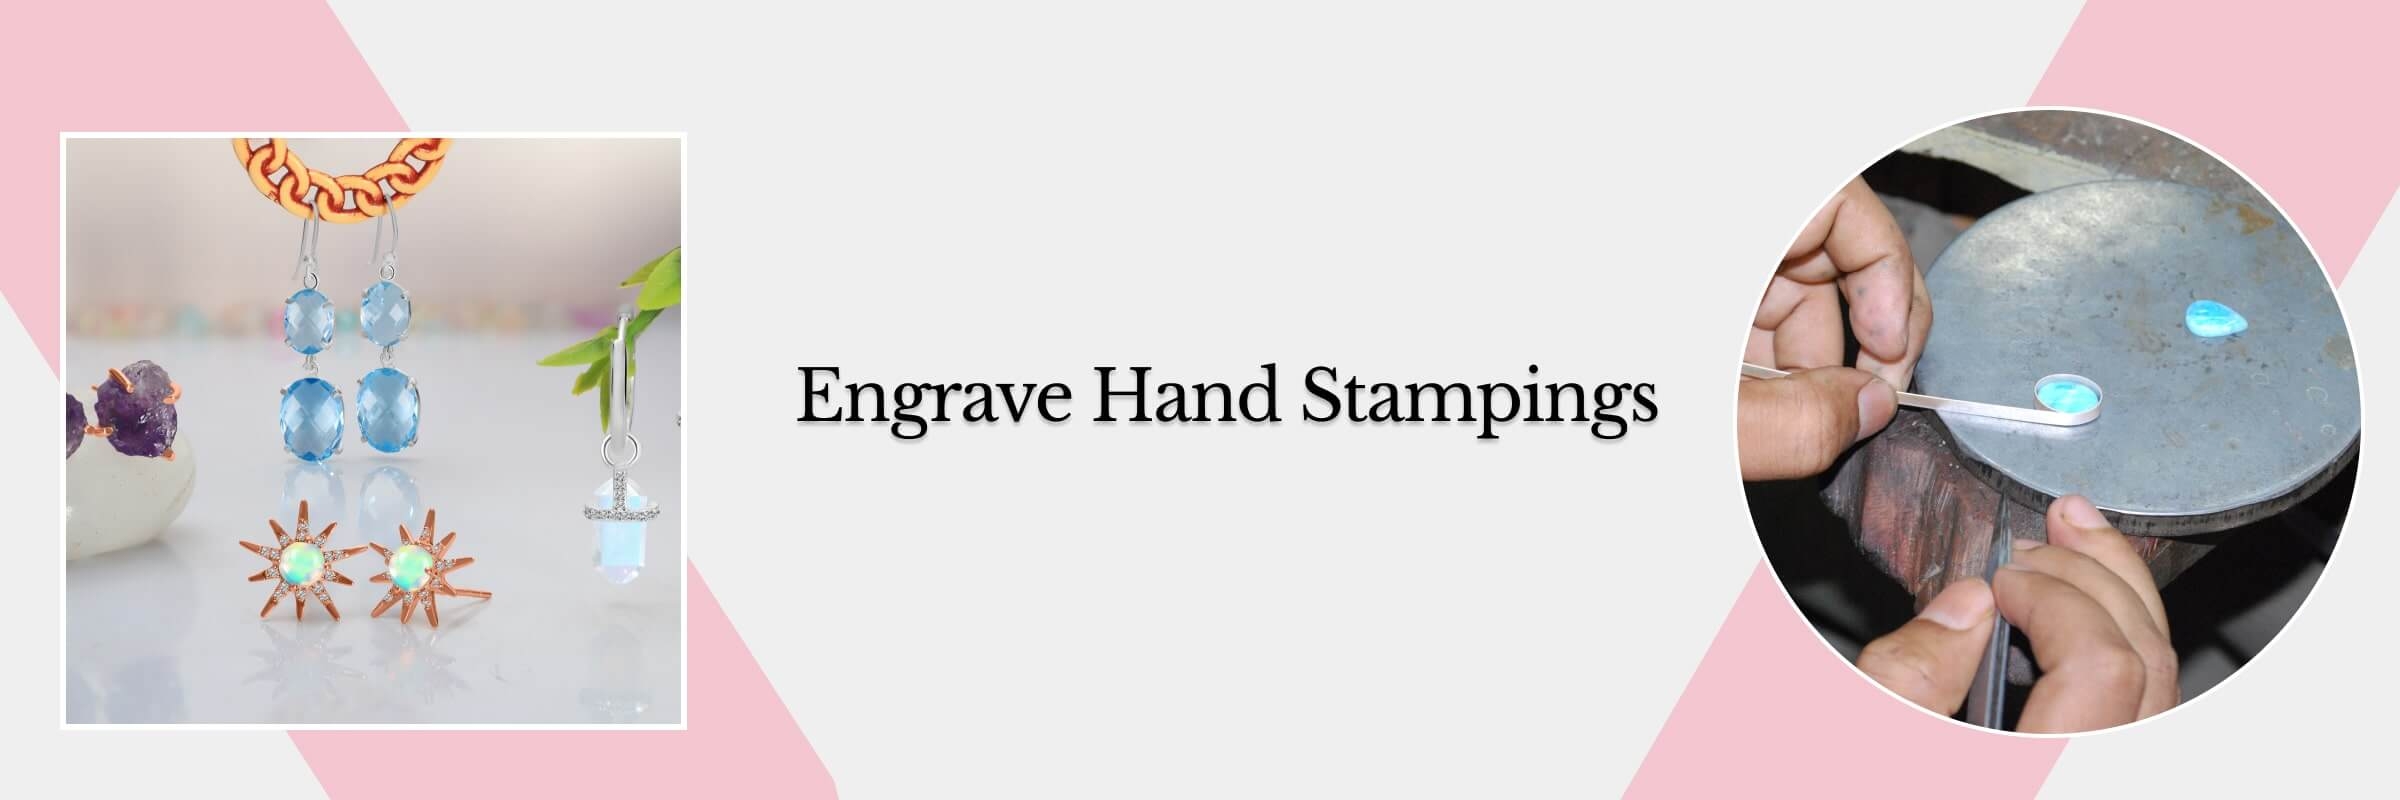 Engraving the hand stamps styles